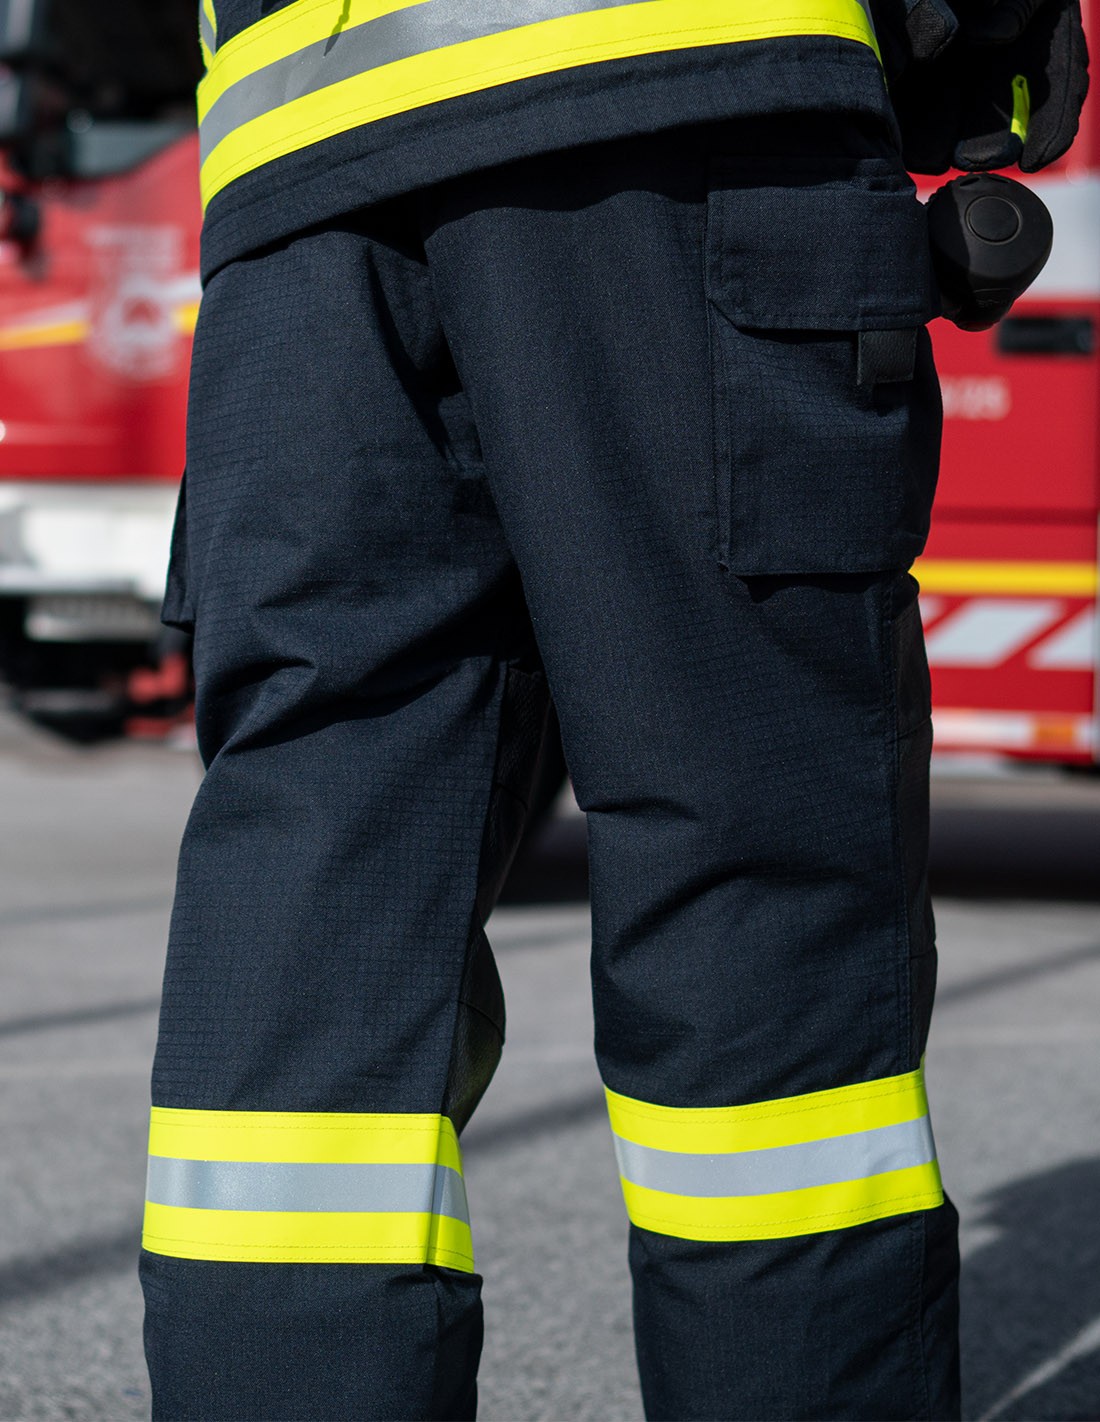 Globe Pant System for Firefighters | MSA Safety | United States